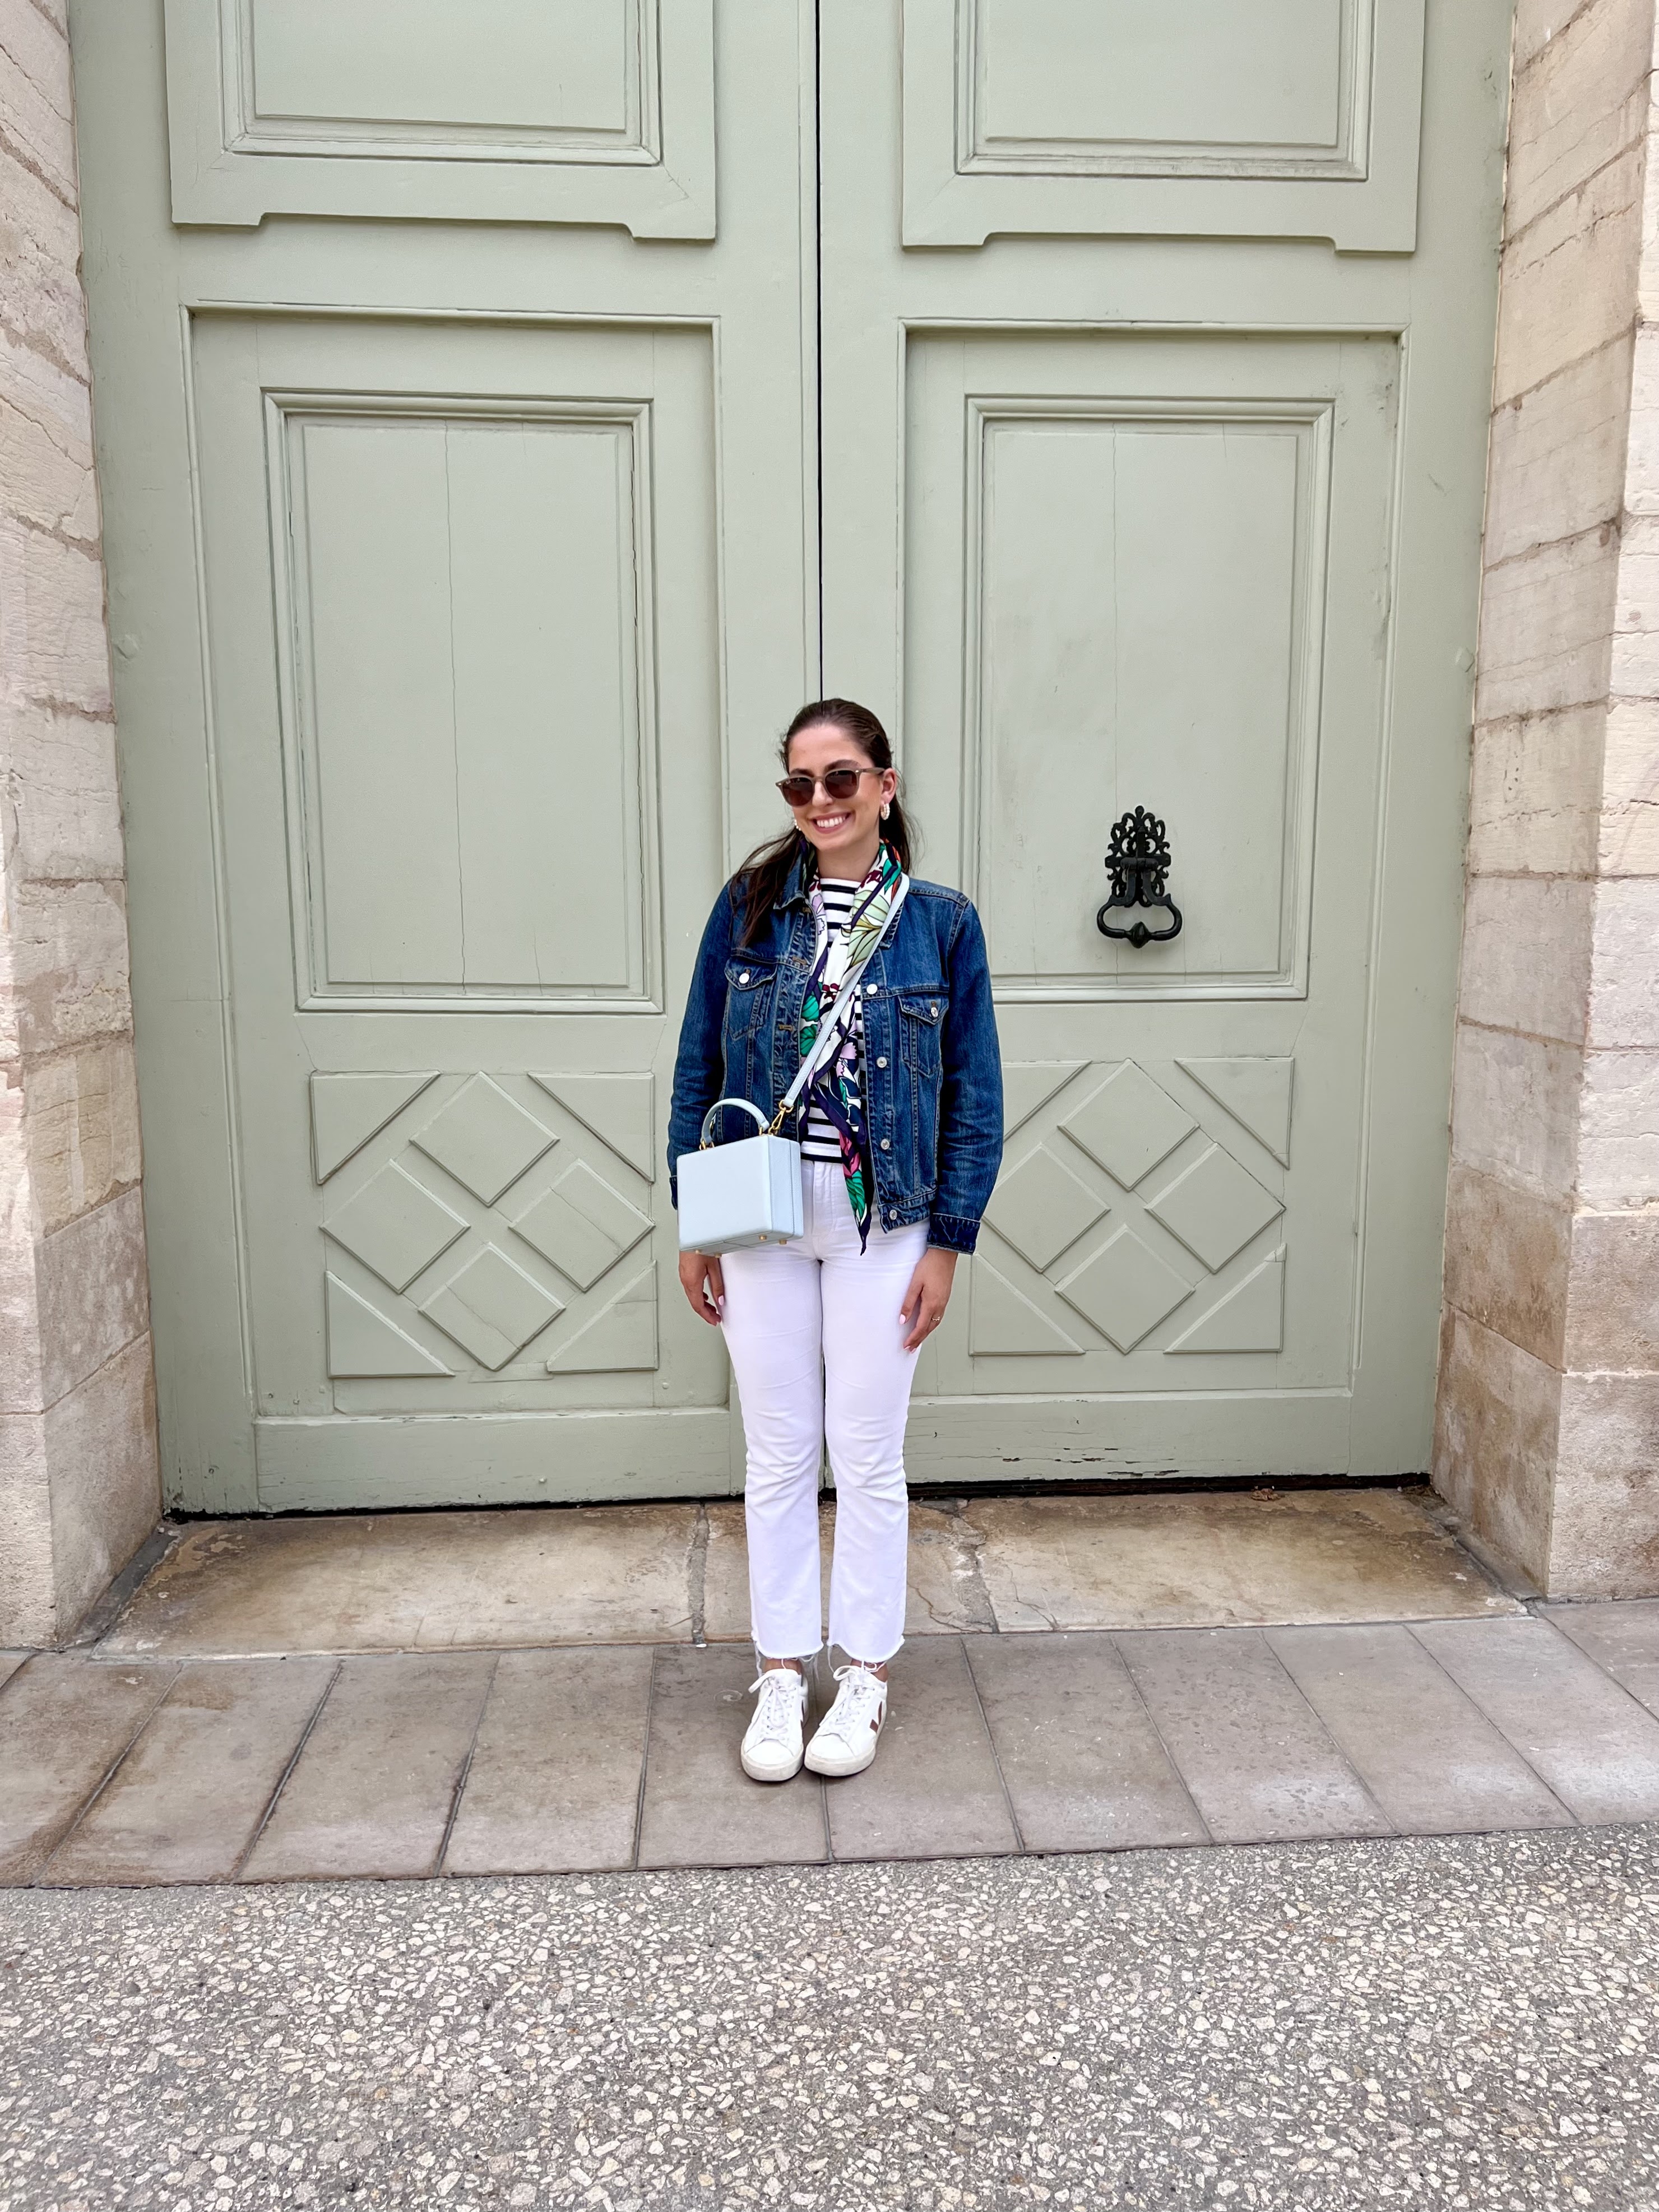 paris outfits, what to wear in paris, denim jacket, white jeans, silk scarf, striped shirt, preppy outfit